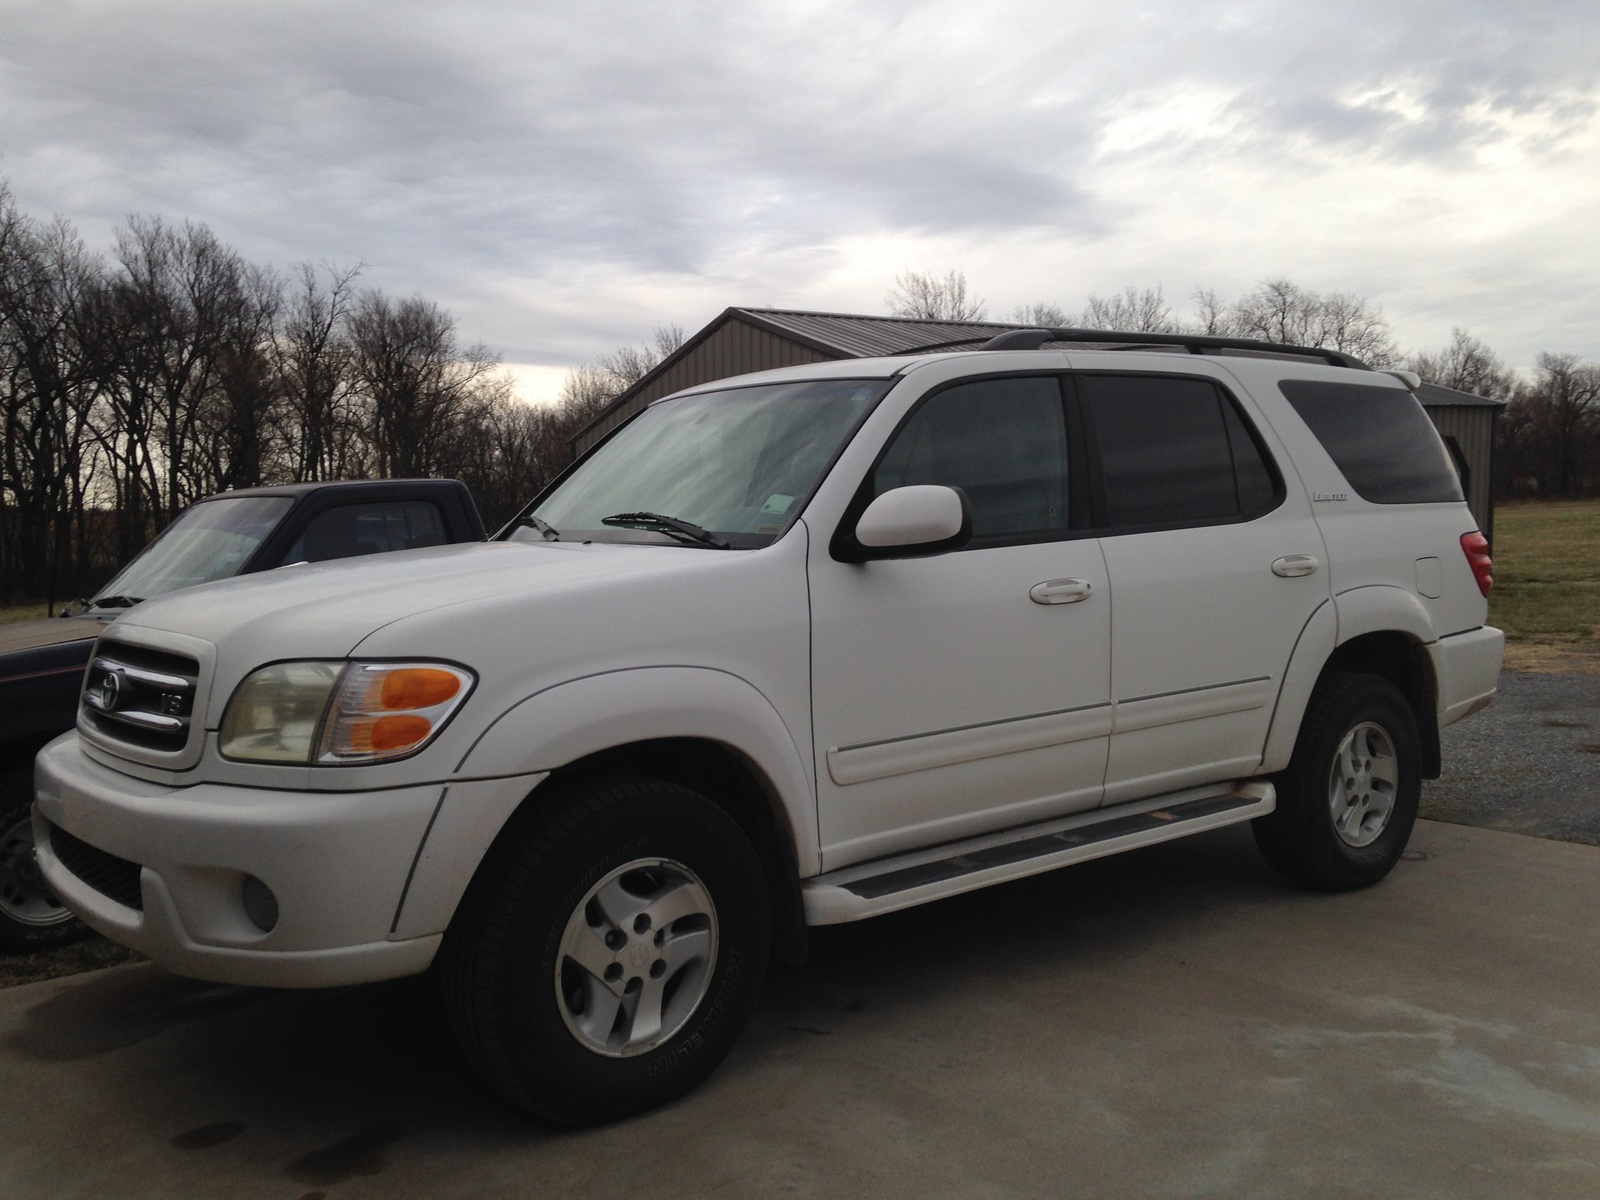 Reviews of toyota sequoia 2001